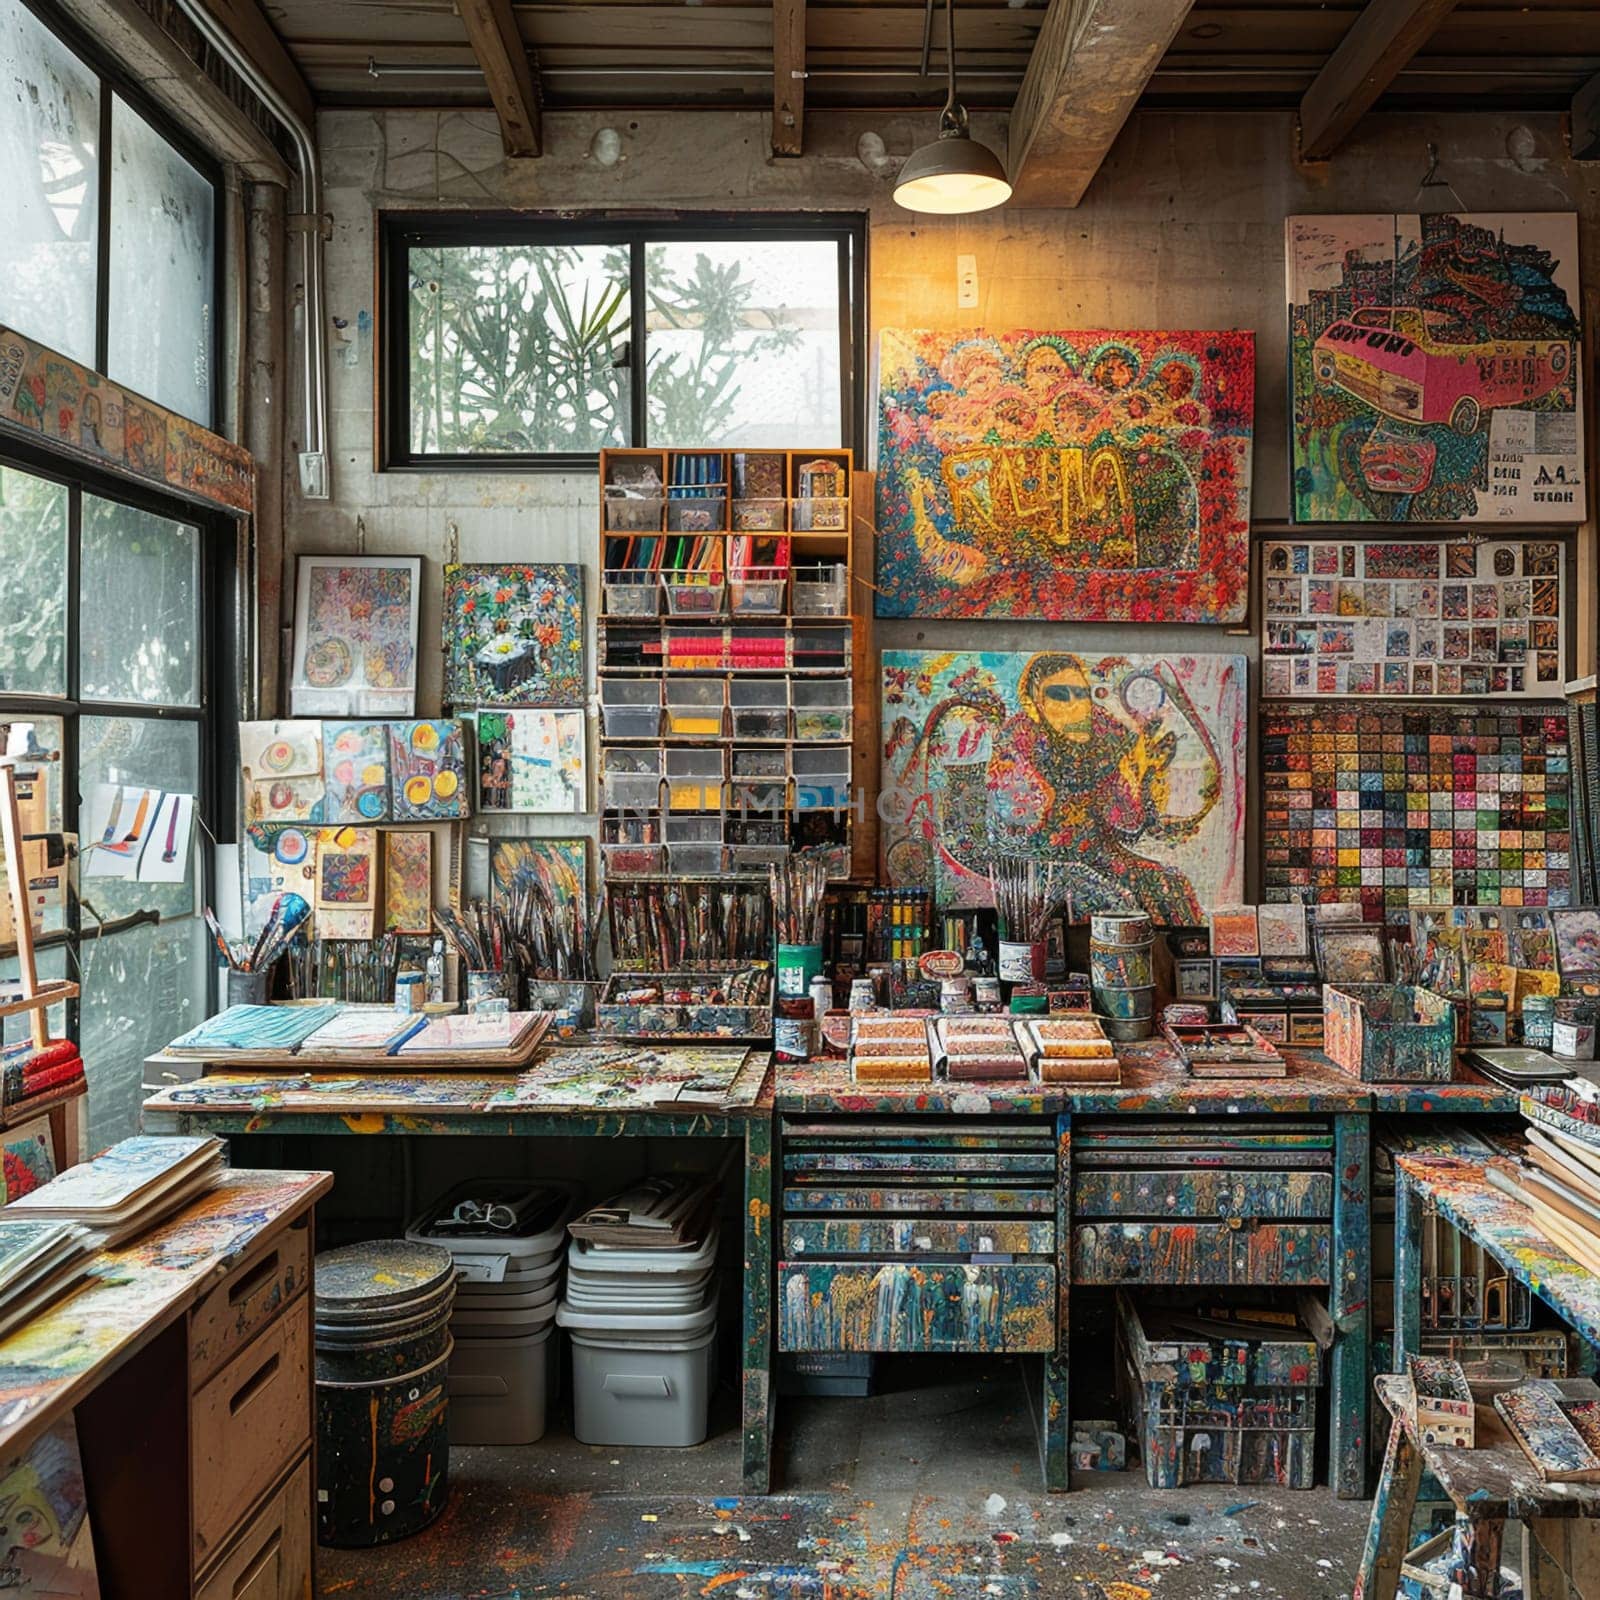 Eclectic artist's studio with vibrant artwork and a variety of materialsup32K HD